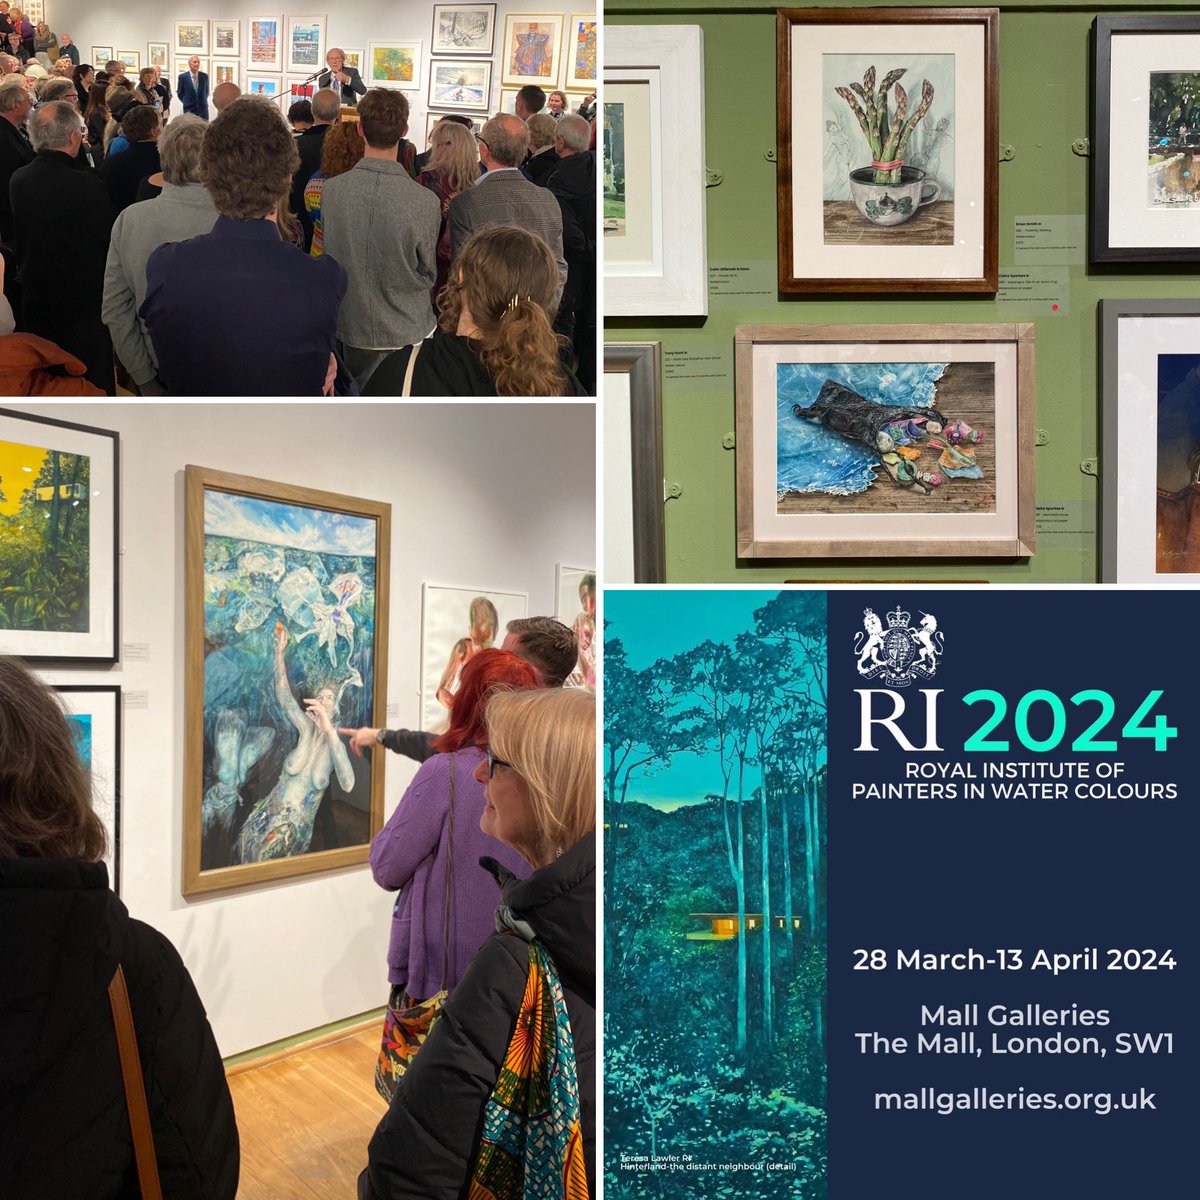 Great preview of the 212th Annual #Exhibition of @RIwatercolours @mallgalleries I have 3 #paintings in the show which continues until 13 April #watercolours #watercolourartist #clairesparkes #adrift #mermaidspurse #asparagustips #acorncup #plasticpollution #figurativeart #artwork